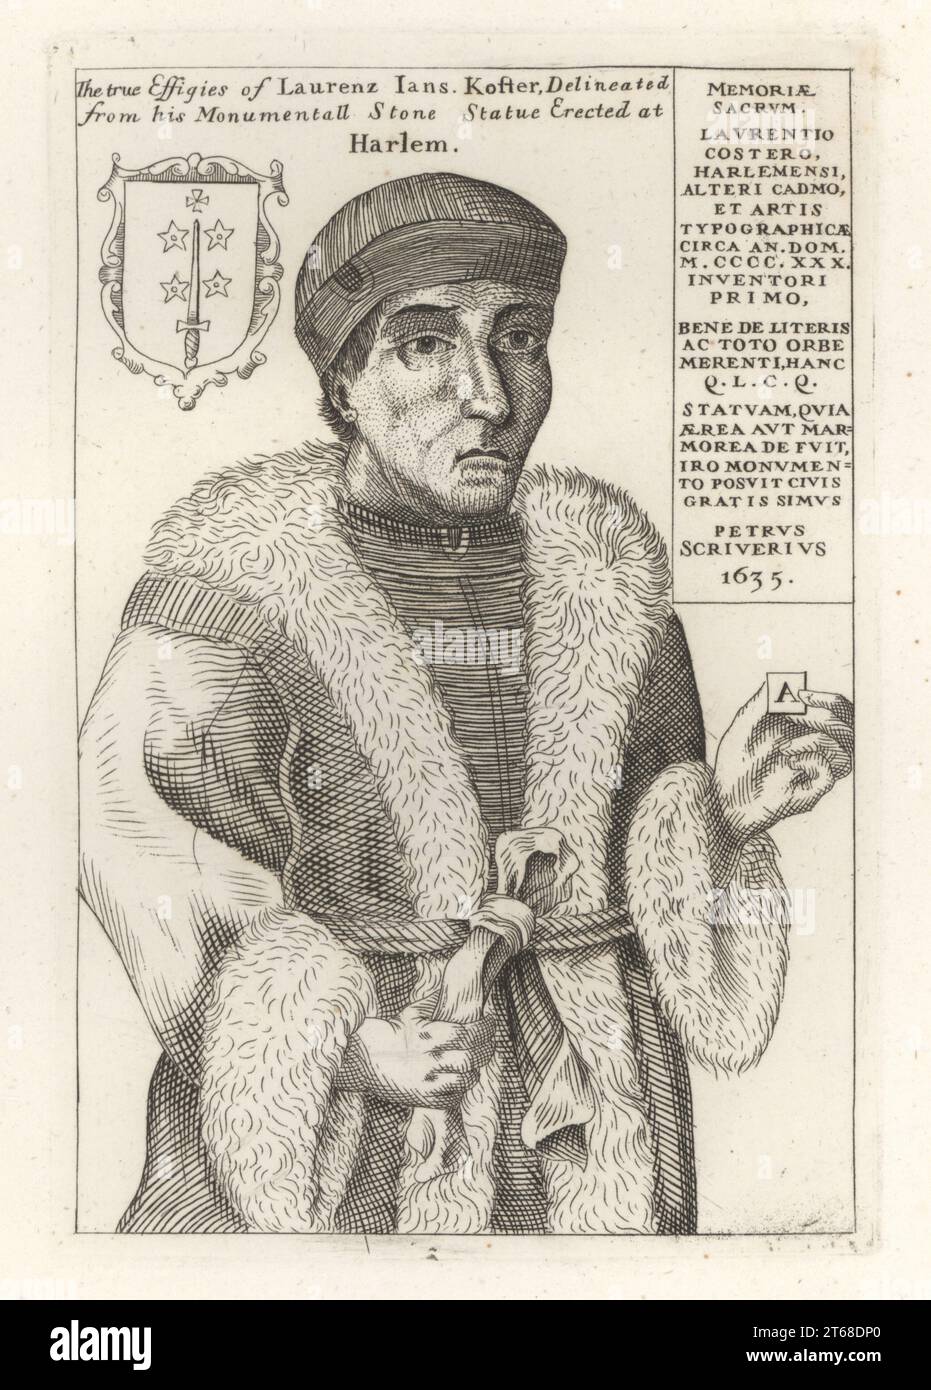 Laurens Janszoon Coster, Dutch inventor of printing, c.1370-1440. Printer and typographer who invented printing simultaneously with Johannes Gutenberg. In cap, fur-lined coat, holding a letter. With coat of arms and biography by Petrus Scriverius. Laurenz Jans Kofter, Laurentio Costero, from his grave effigy in Harlem. Copperplate engraving from Samuel Woodburns Gallery of Rare Portraits Consisting of Original Plates, George Jones, 102 St Martins Lane, London, 1816. Stock Photo